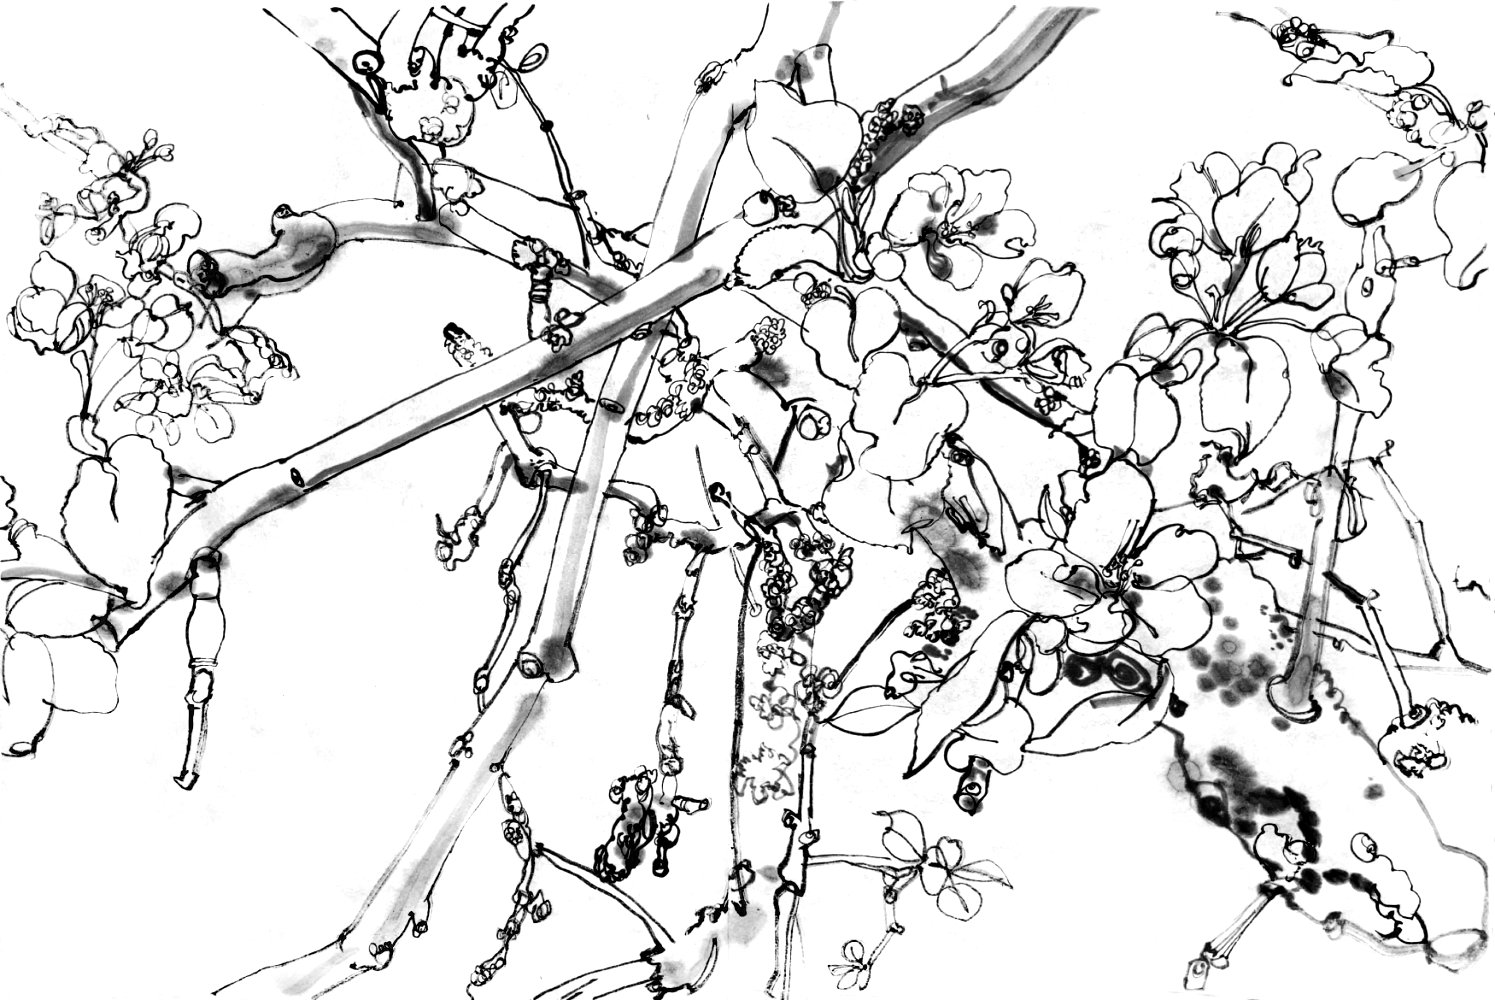 Ink drawing of twigs of an apple tree, some with leafs, blossoms and buds.